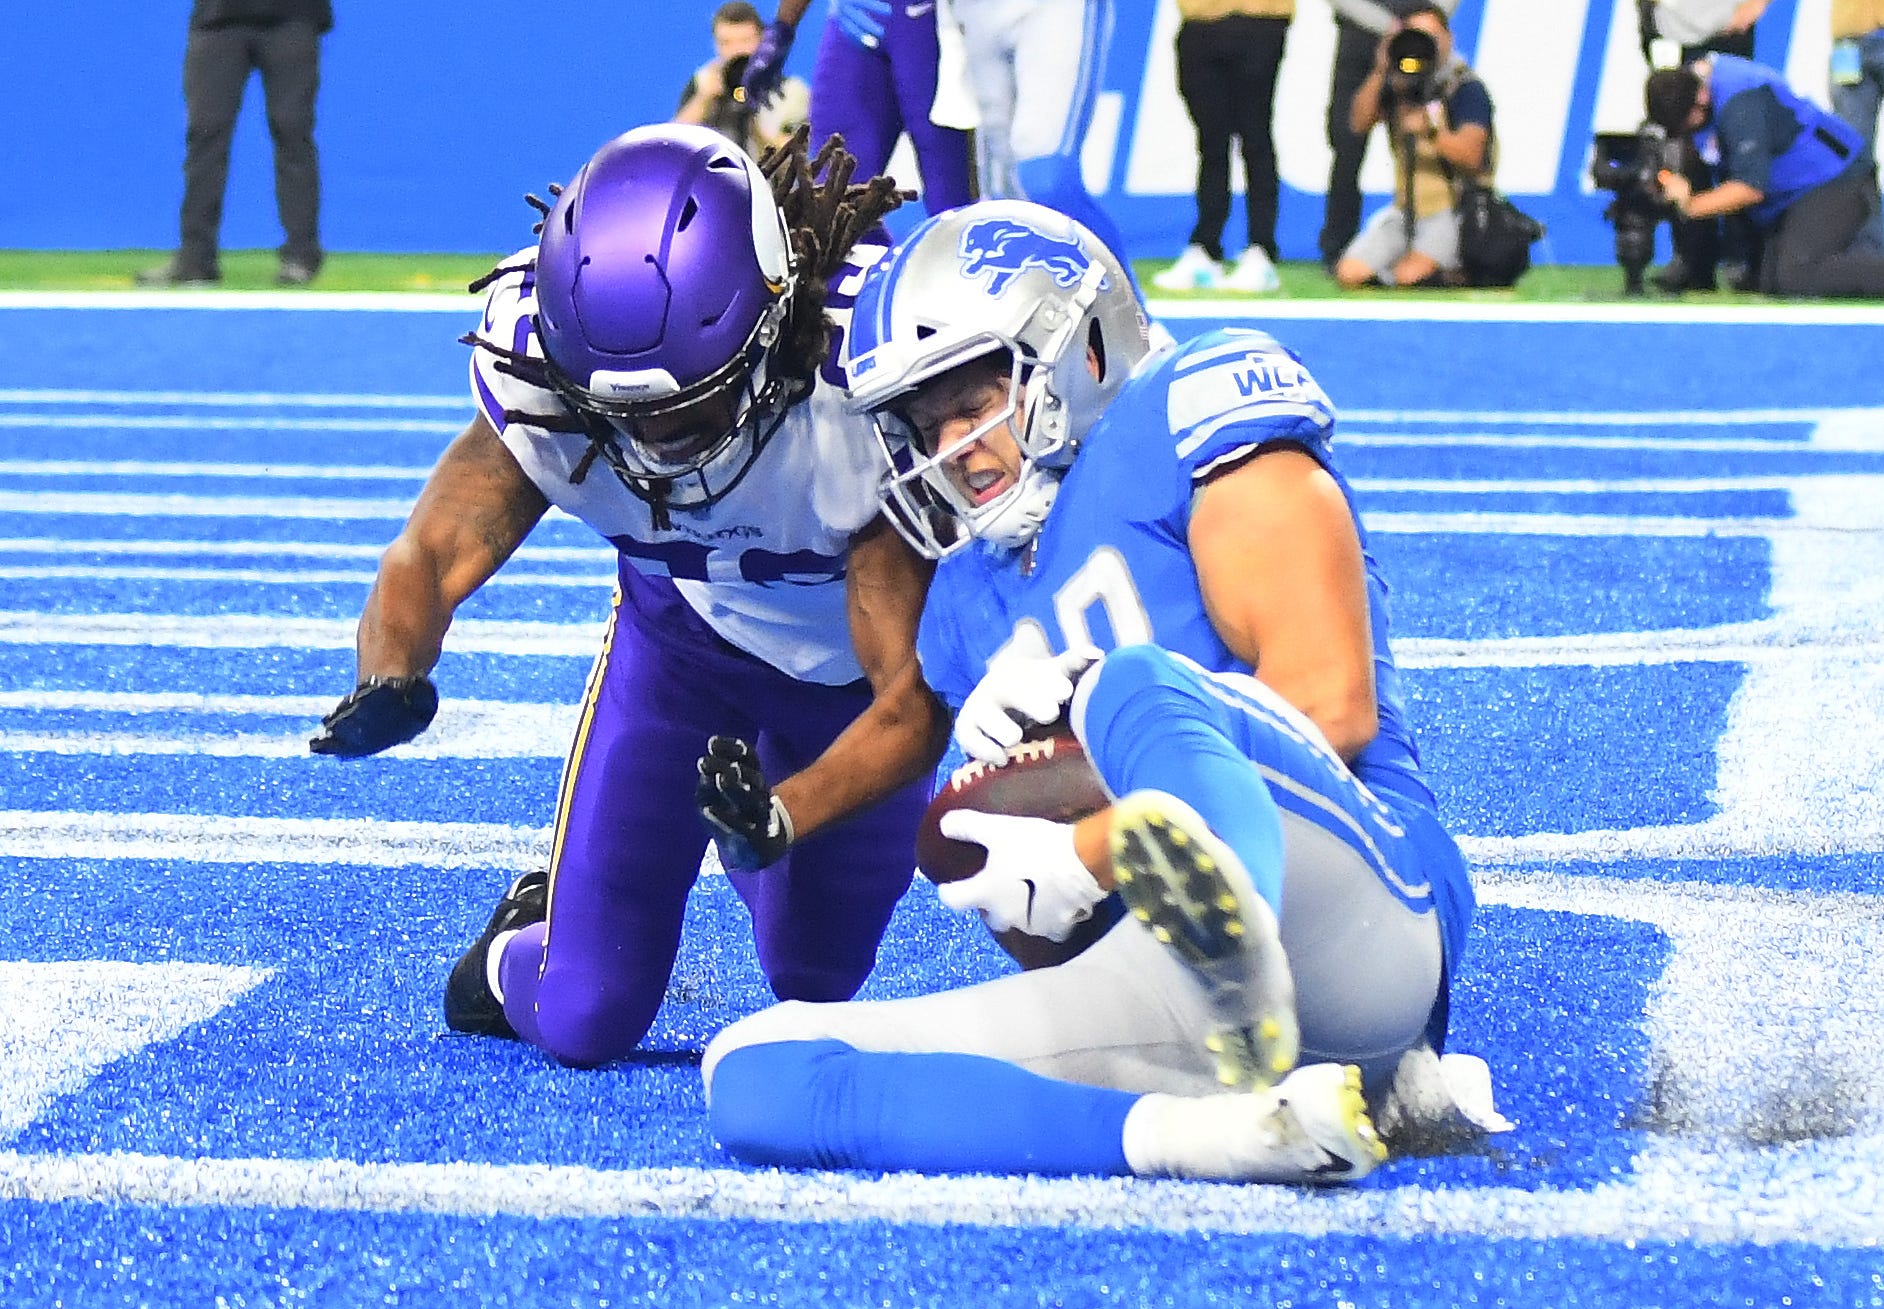 Lions ' T.J. Hockenson pulls in a pass in front of Vikings ' Trae Waynes, but it bounced off the turf first for an incompletion in the first quarter.